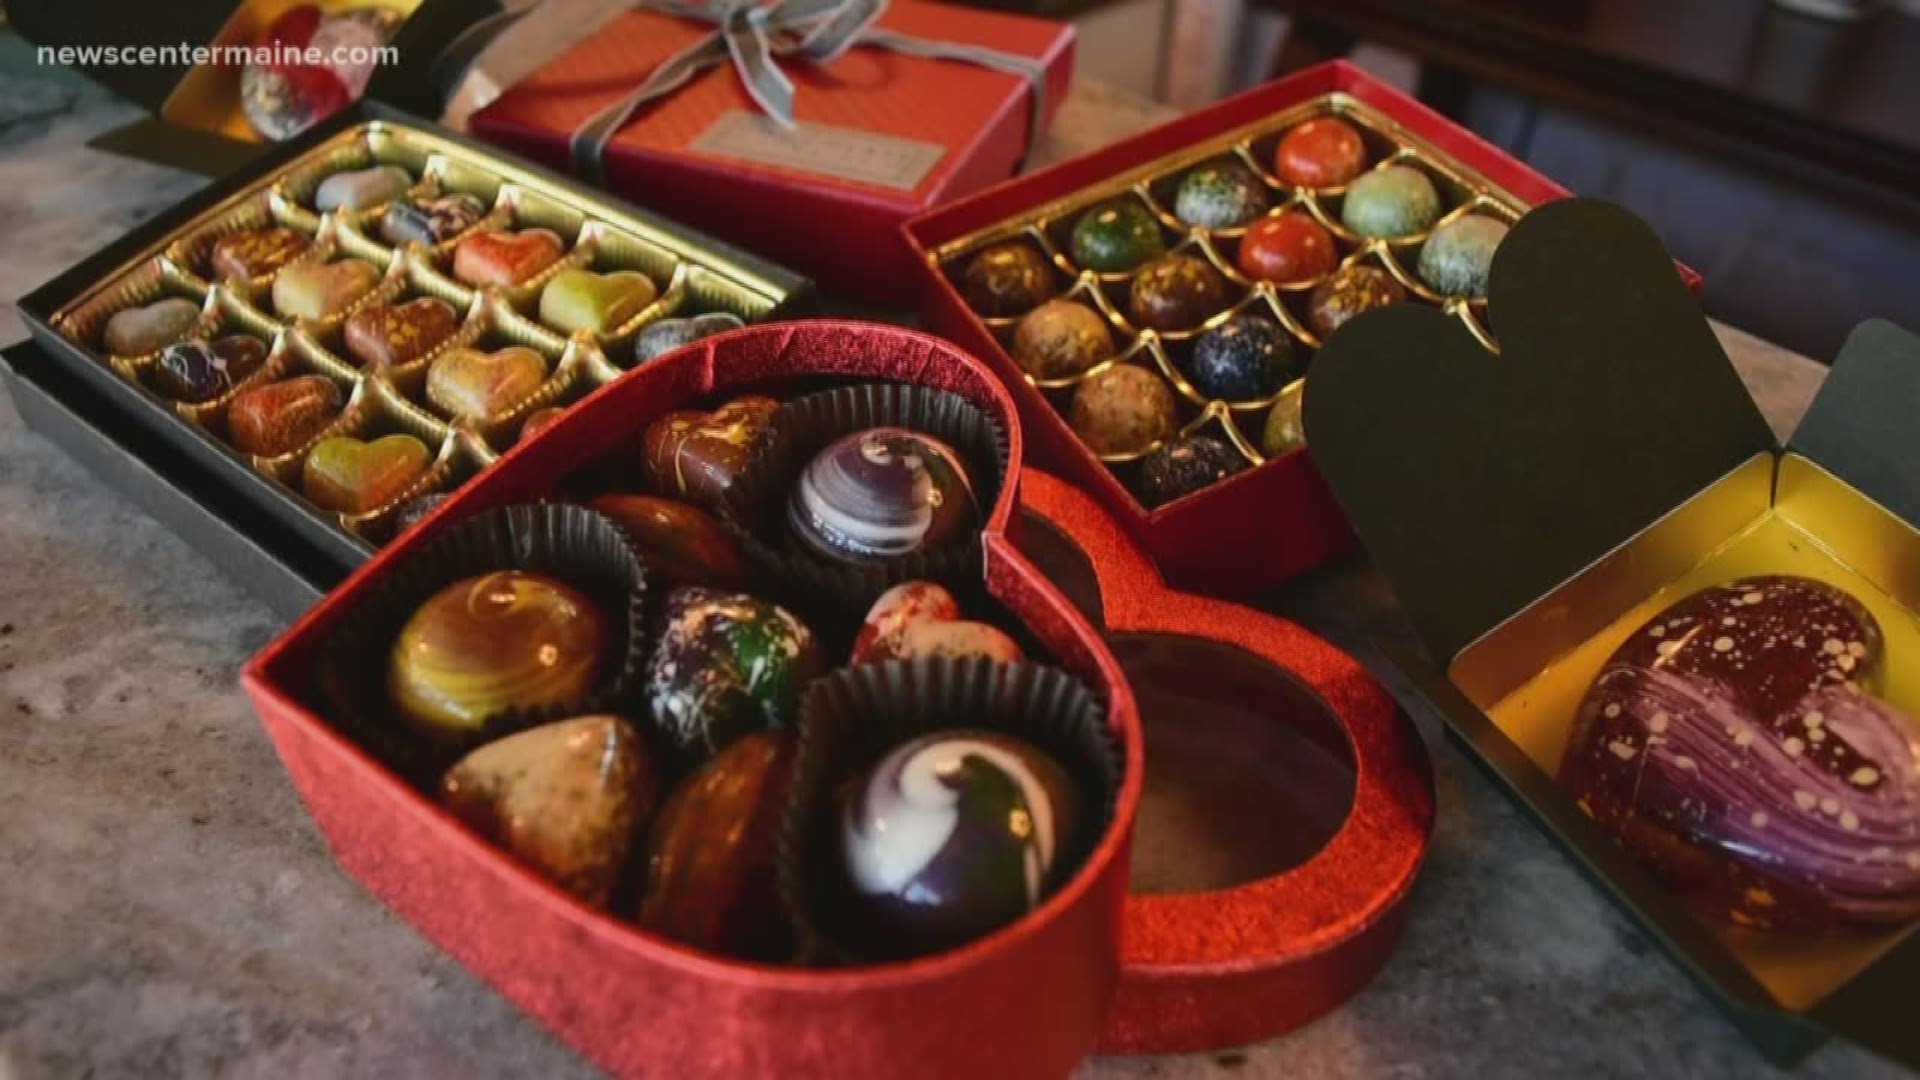 Chocolats Passion creates French confections with surprising flavors.